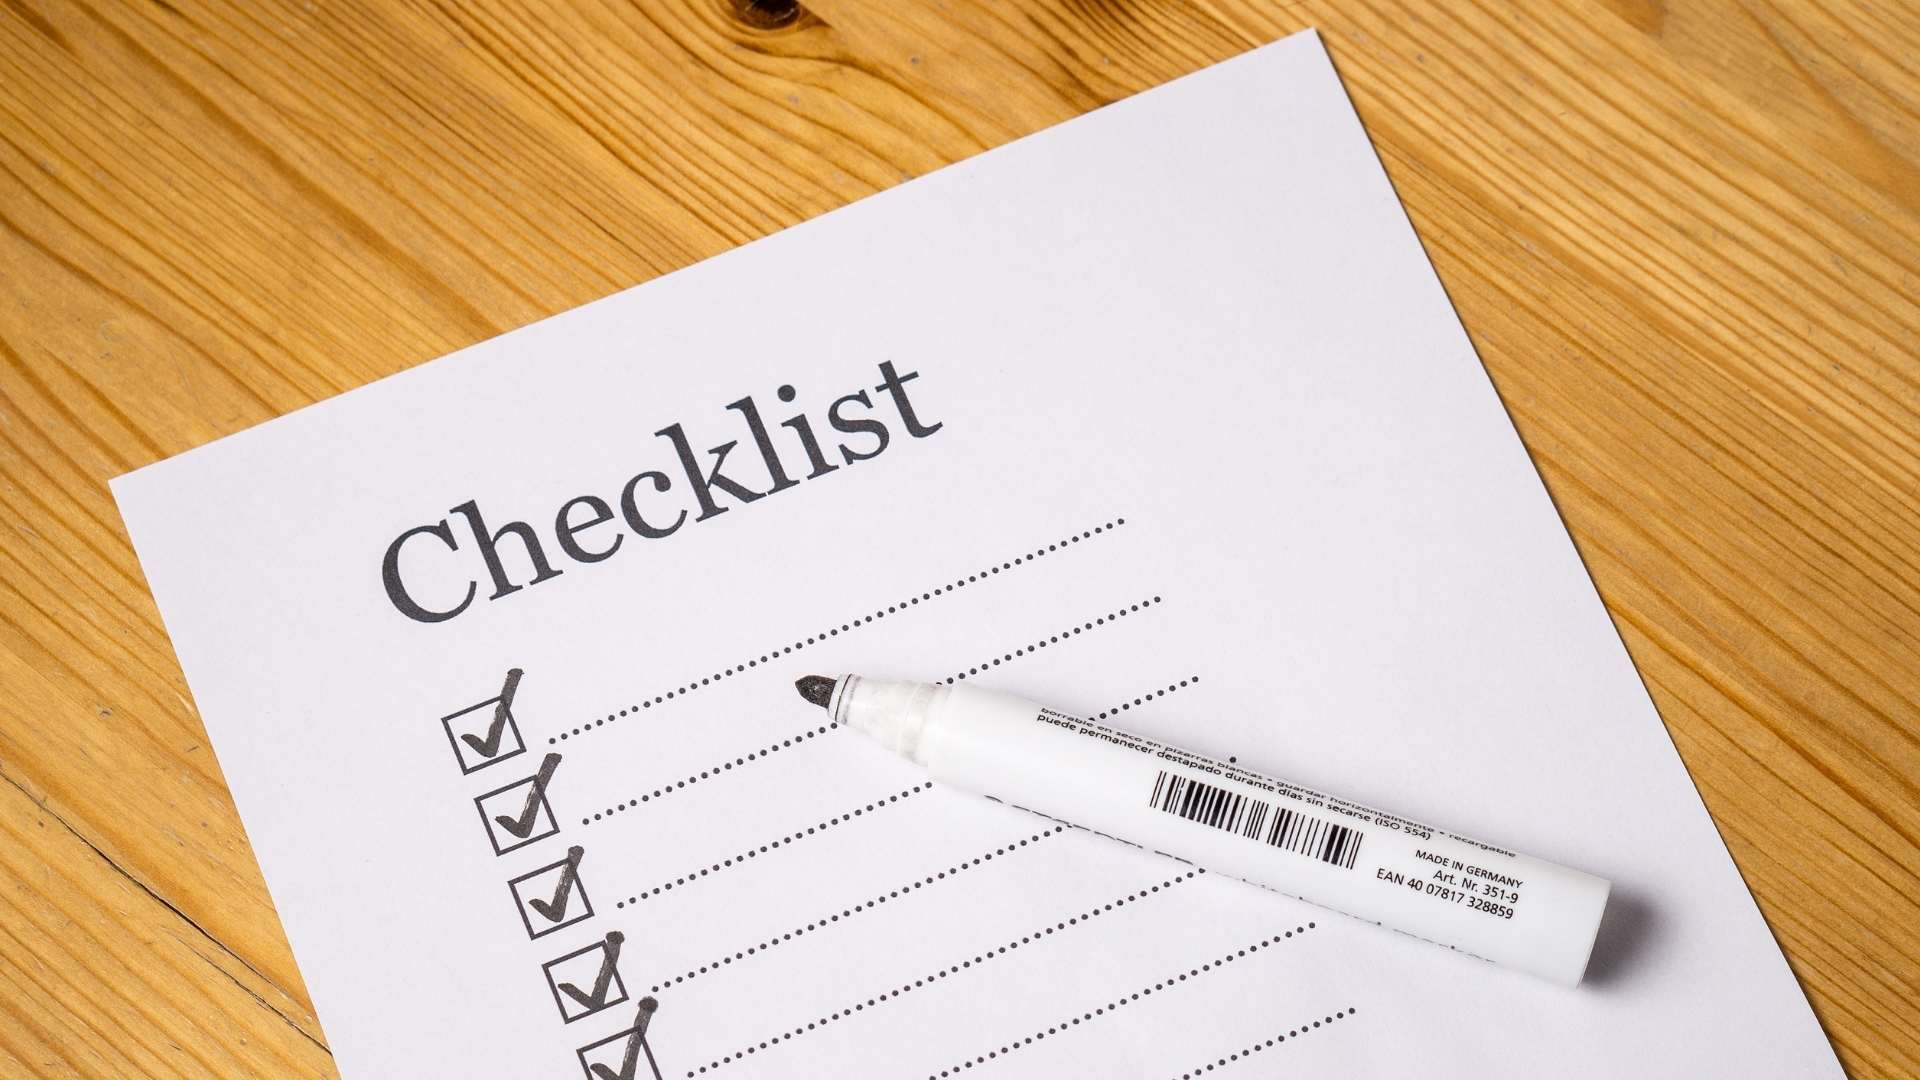 Host Checklist for Virtual Event or Meeting